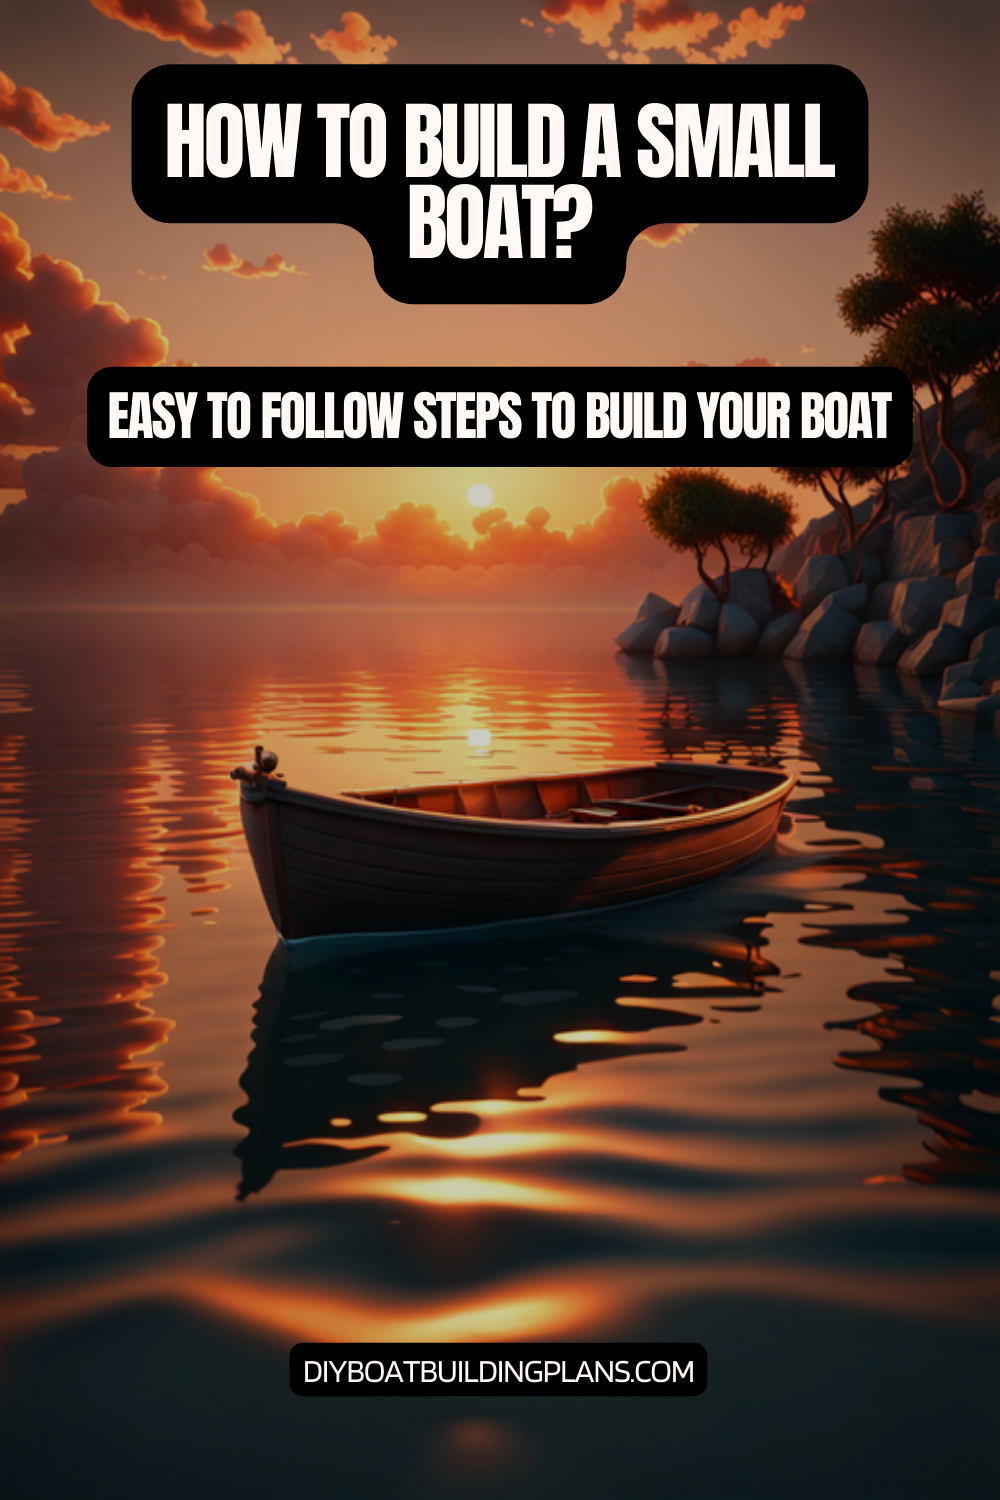 How To Build a Small Boat